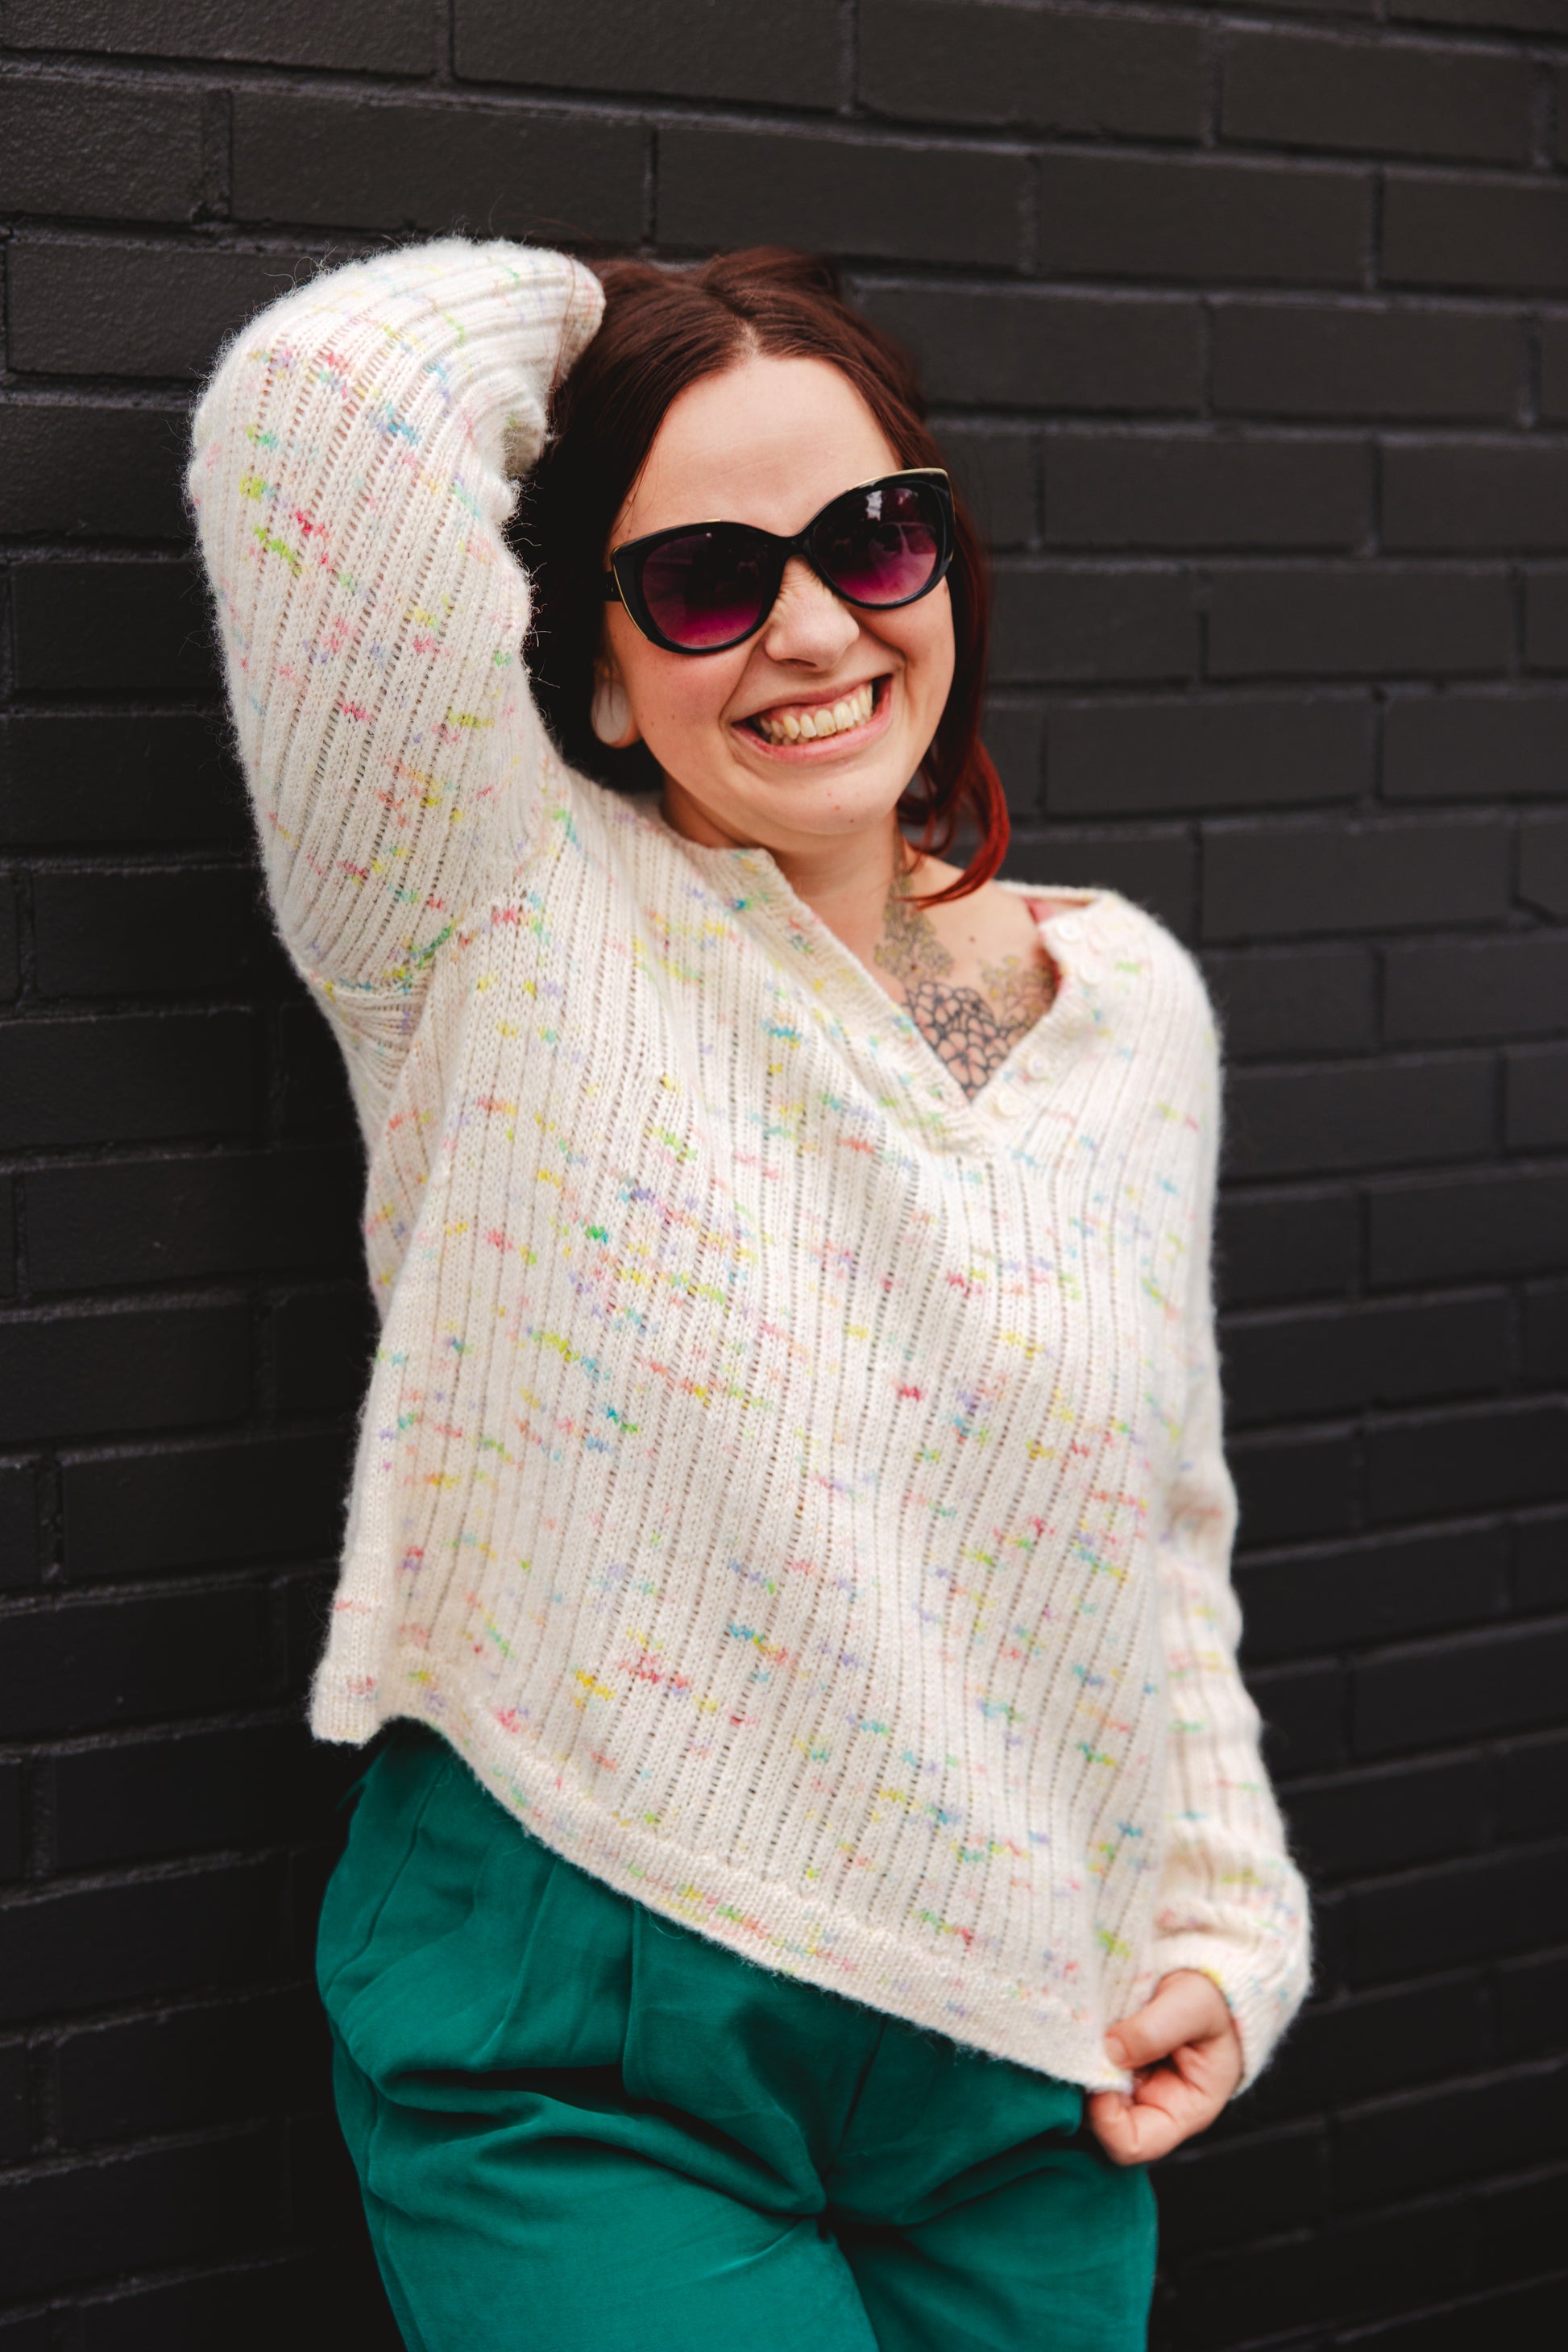 Bess grins at the camera, one hand in her hair. Her henley shirt is knit with a white yarn with pieces of rainbow tweed, and her pants are teal.